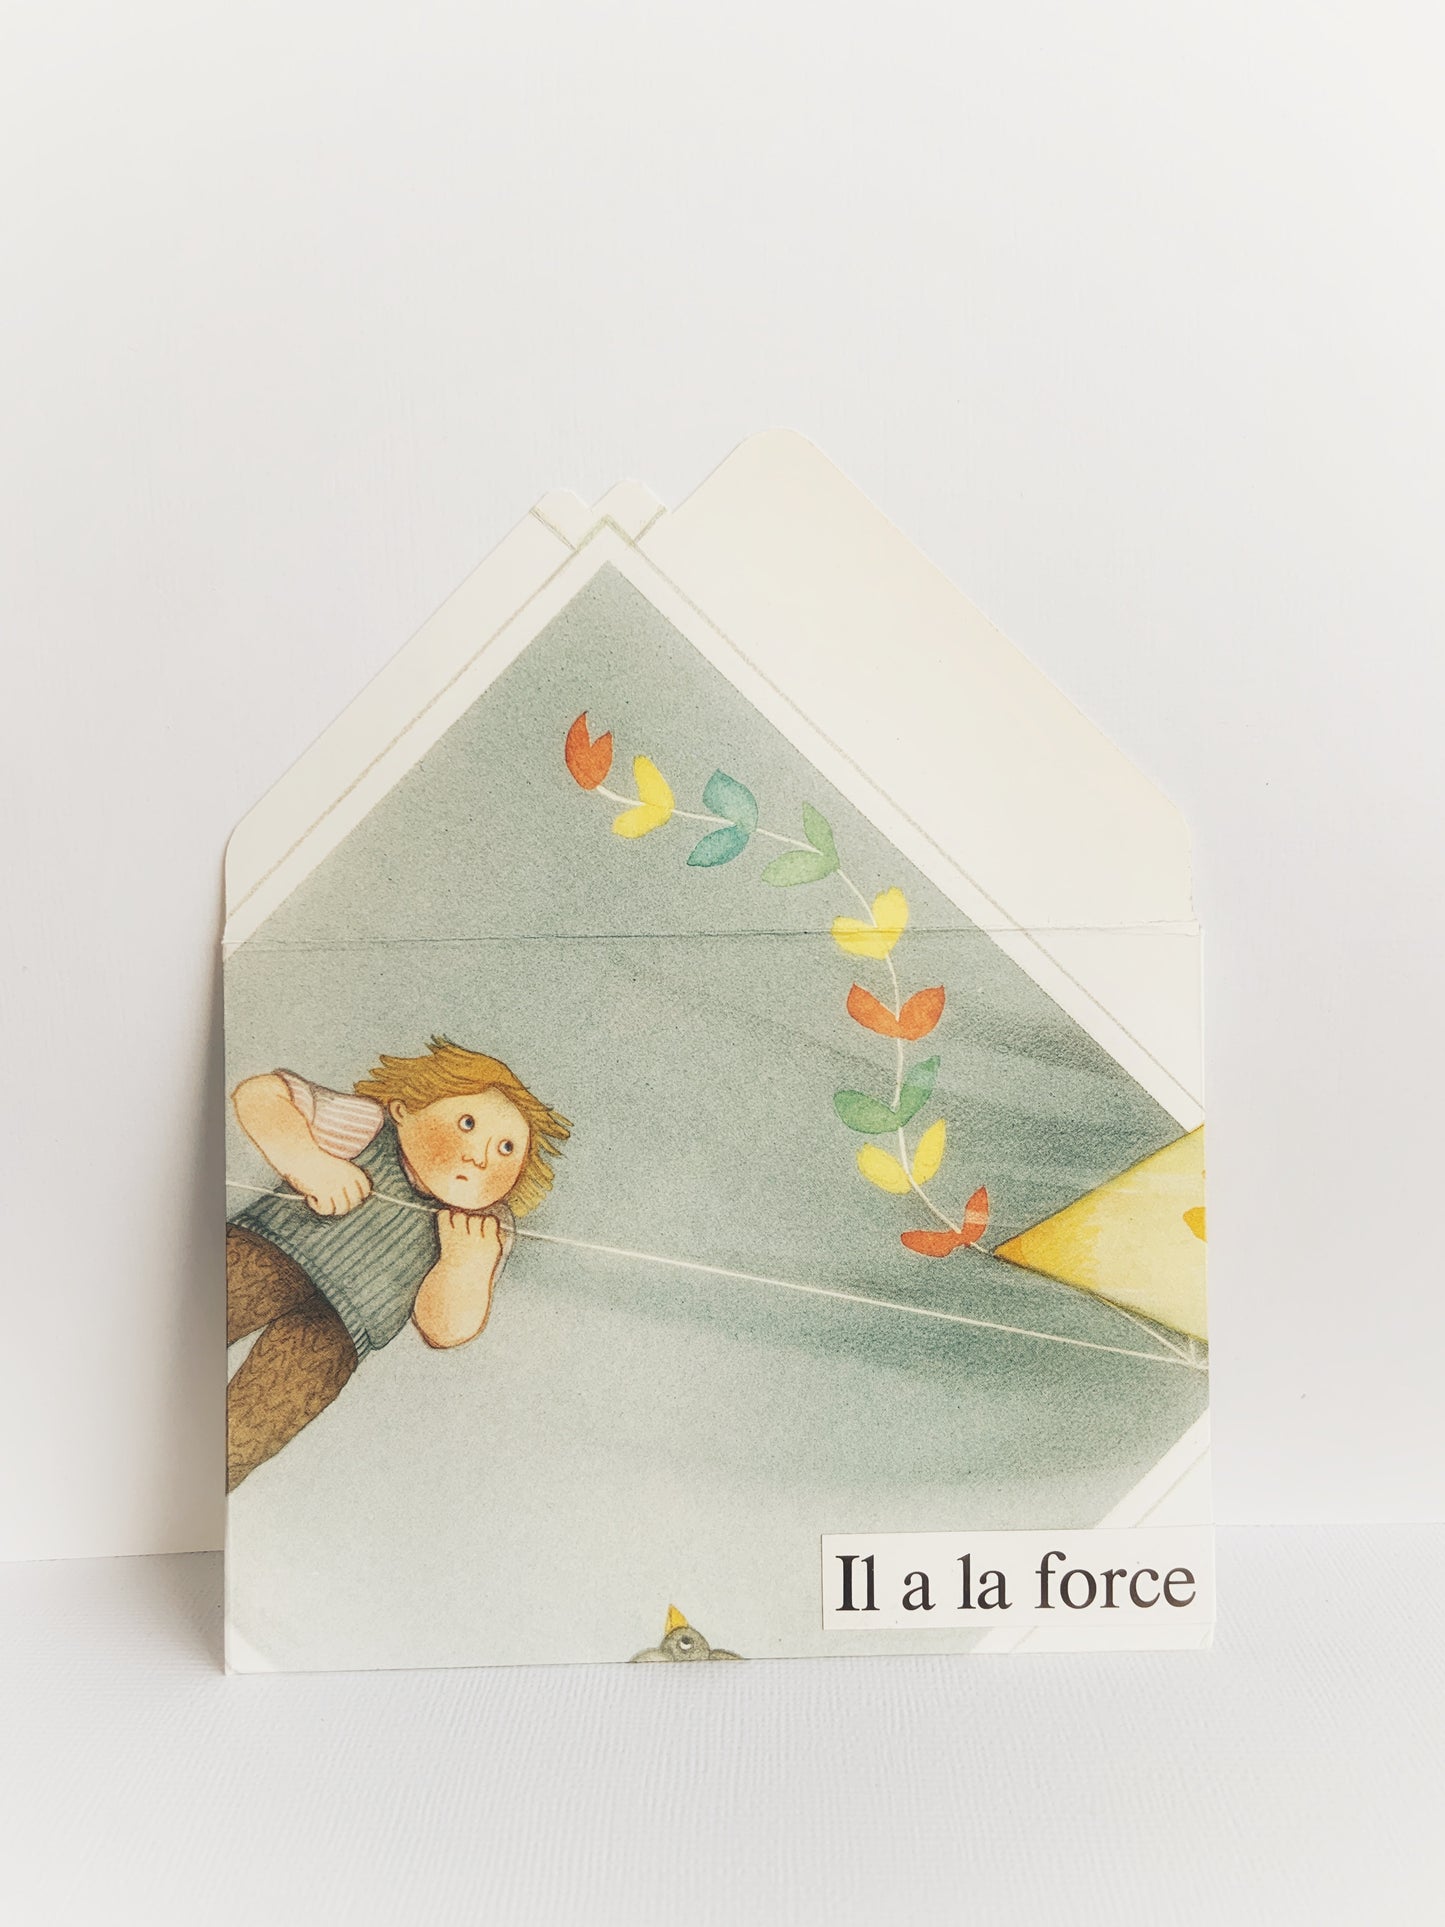 The front of a handmade envelope with the flap open showing a young boy flying a kite with a colorful tail and 'Il a la force' at the bottom.